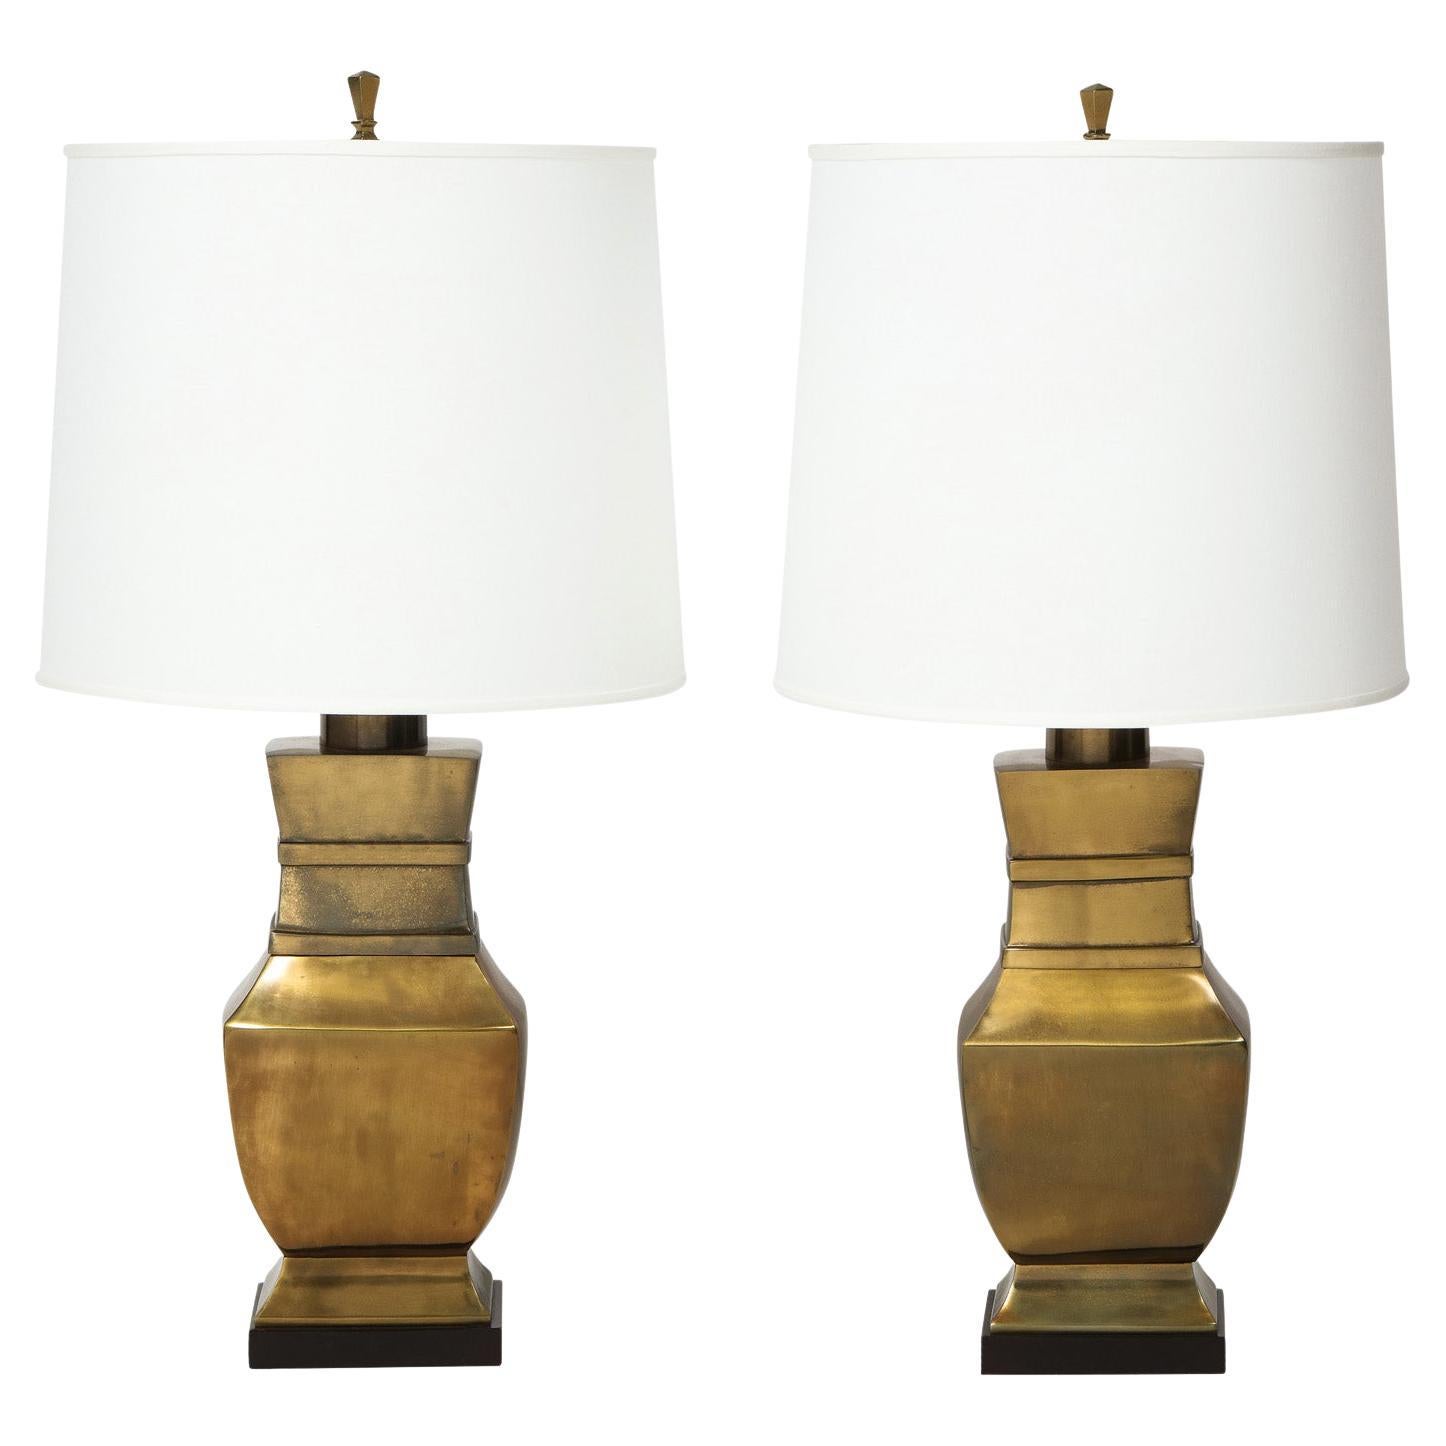 Paul Hanson Neoclassical Table Lamps in Bronze, 1950s For Sale